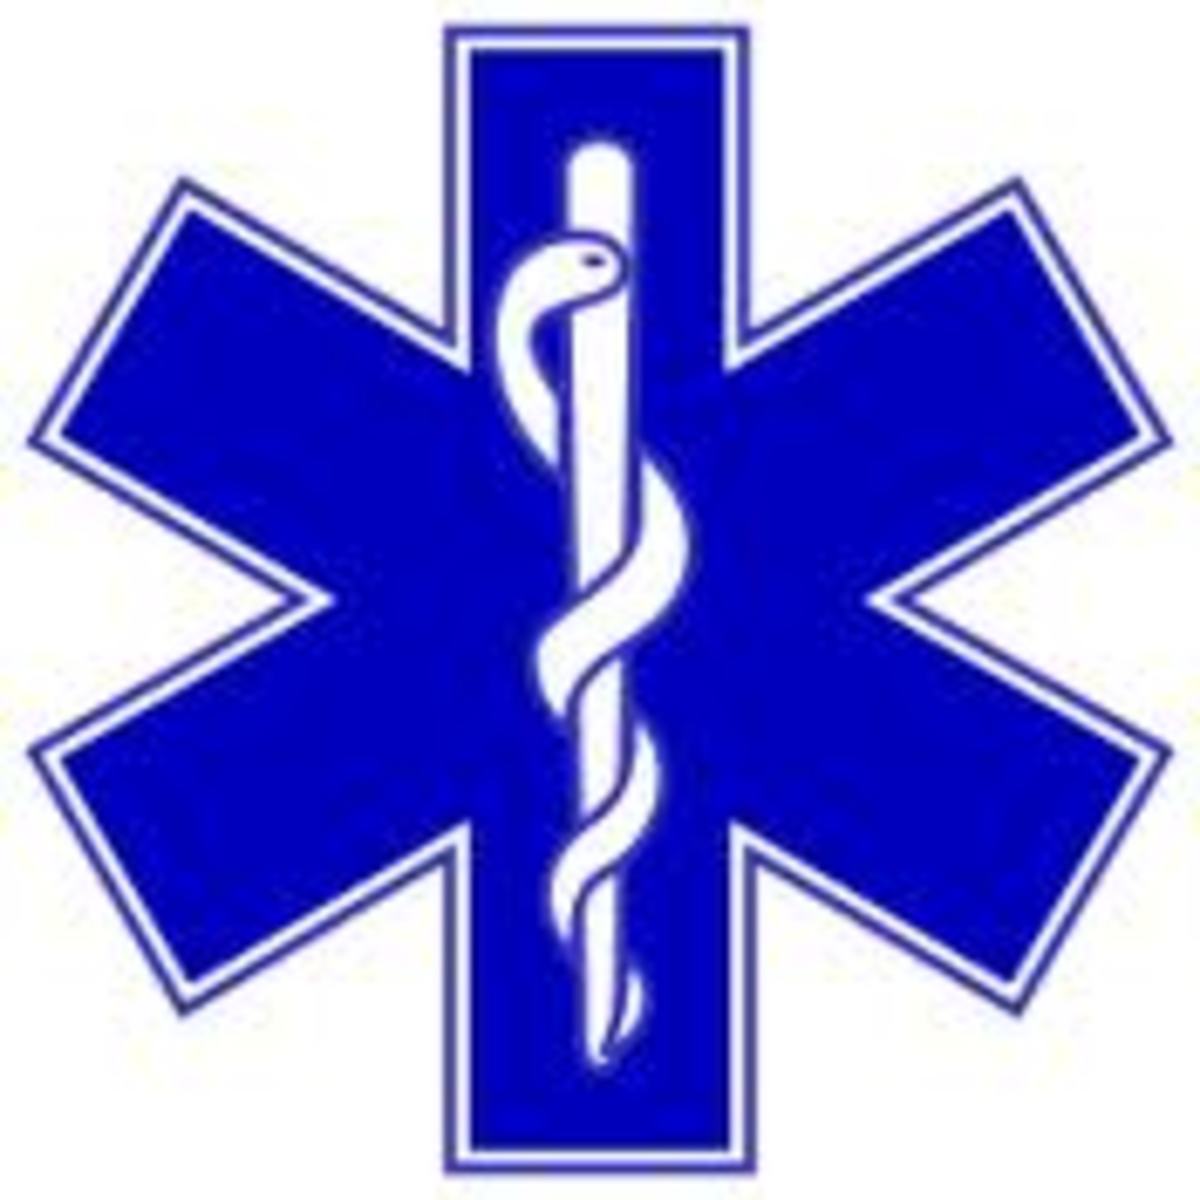 Save Your Life! Wear the Medical Alert Symbol and Keep Your Medical History in Your Wallet